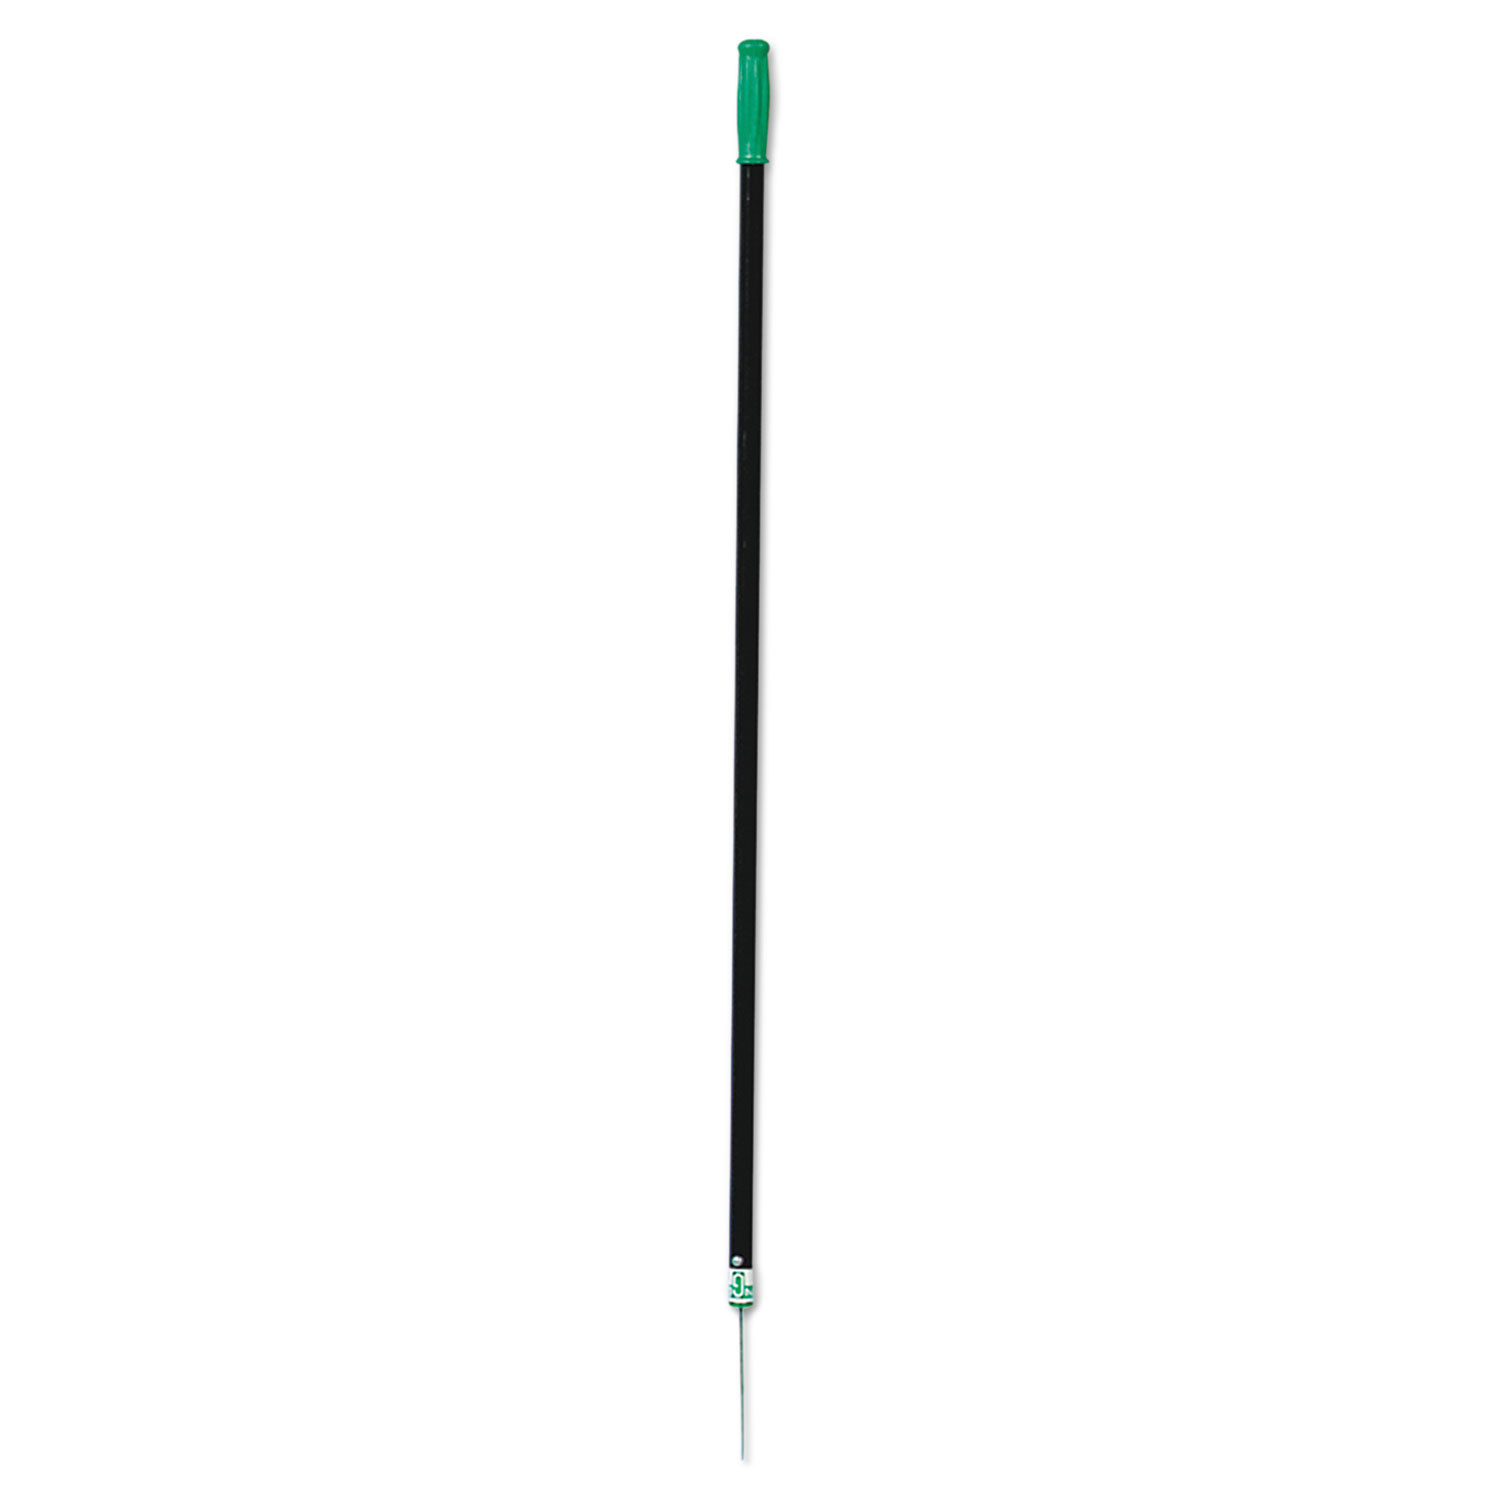  Unger PPPP0 People's Paper Picker Pin Pole, 42in, Black/Green (UNGPPPP) 